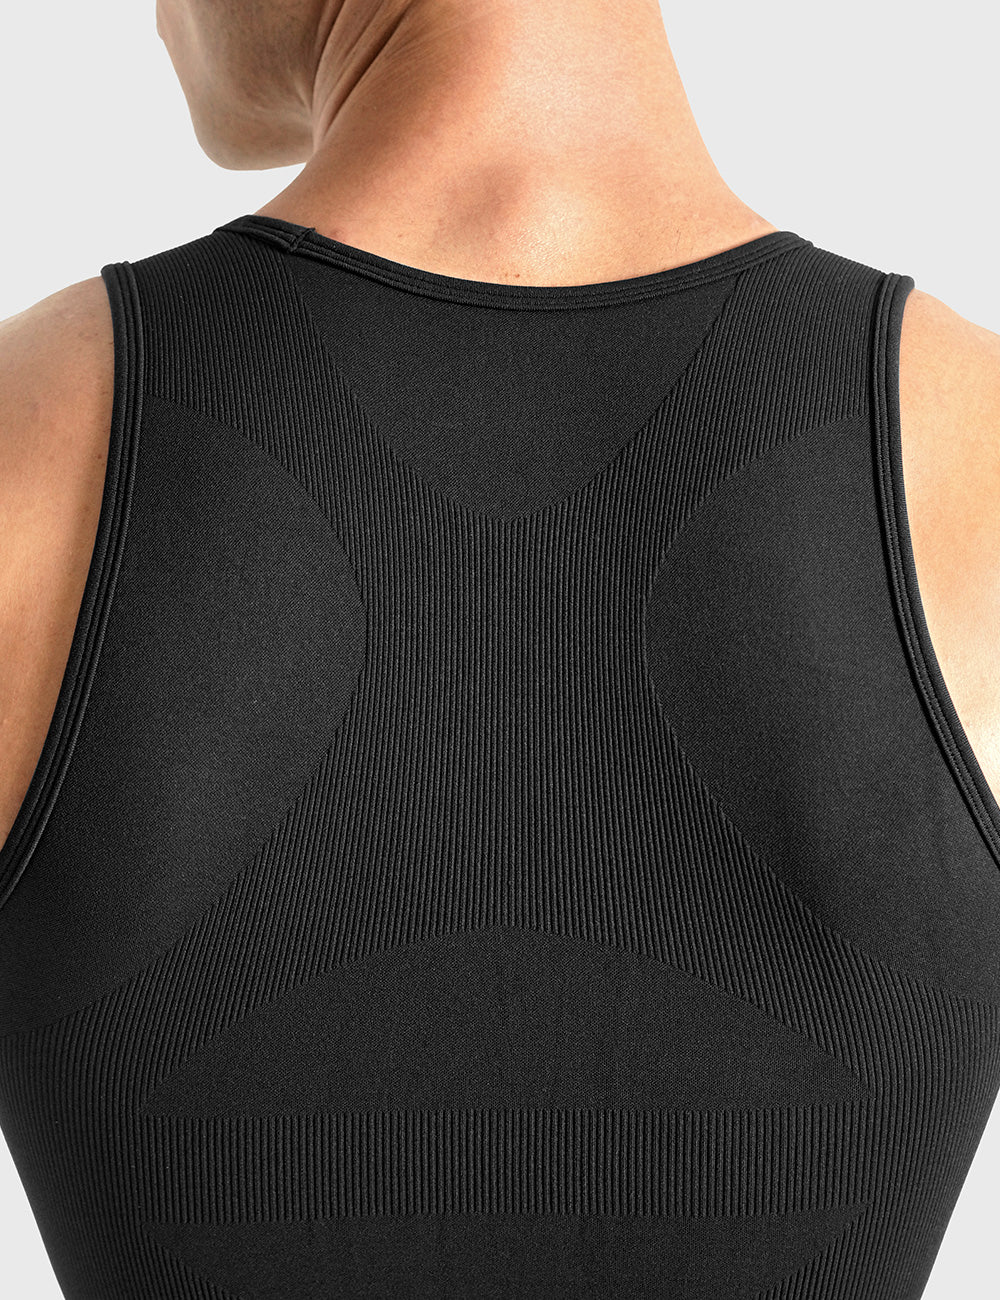 Work Play No-Bra Required V Tank Top